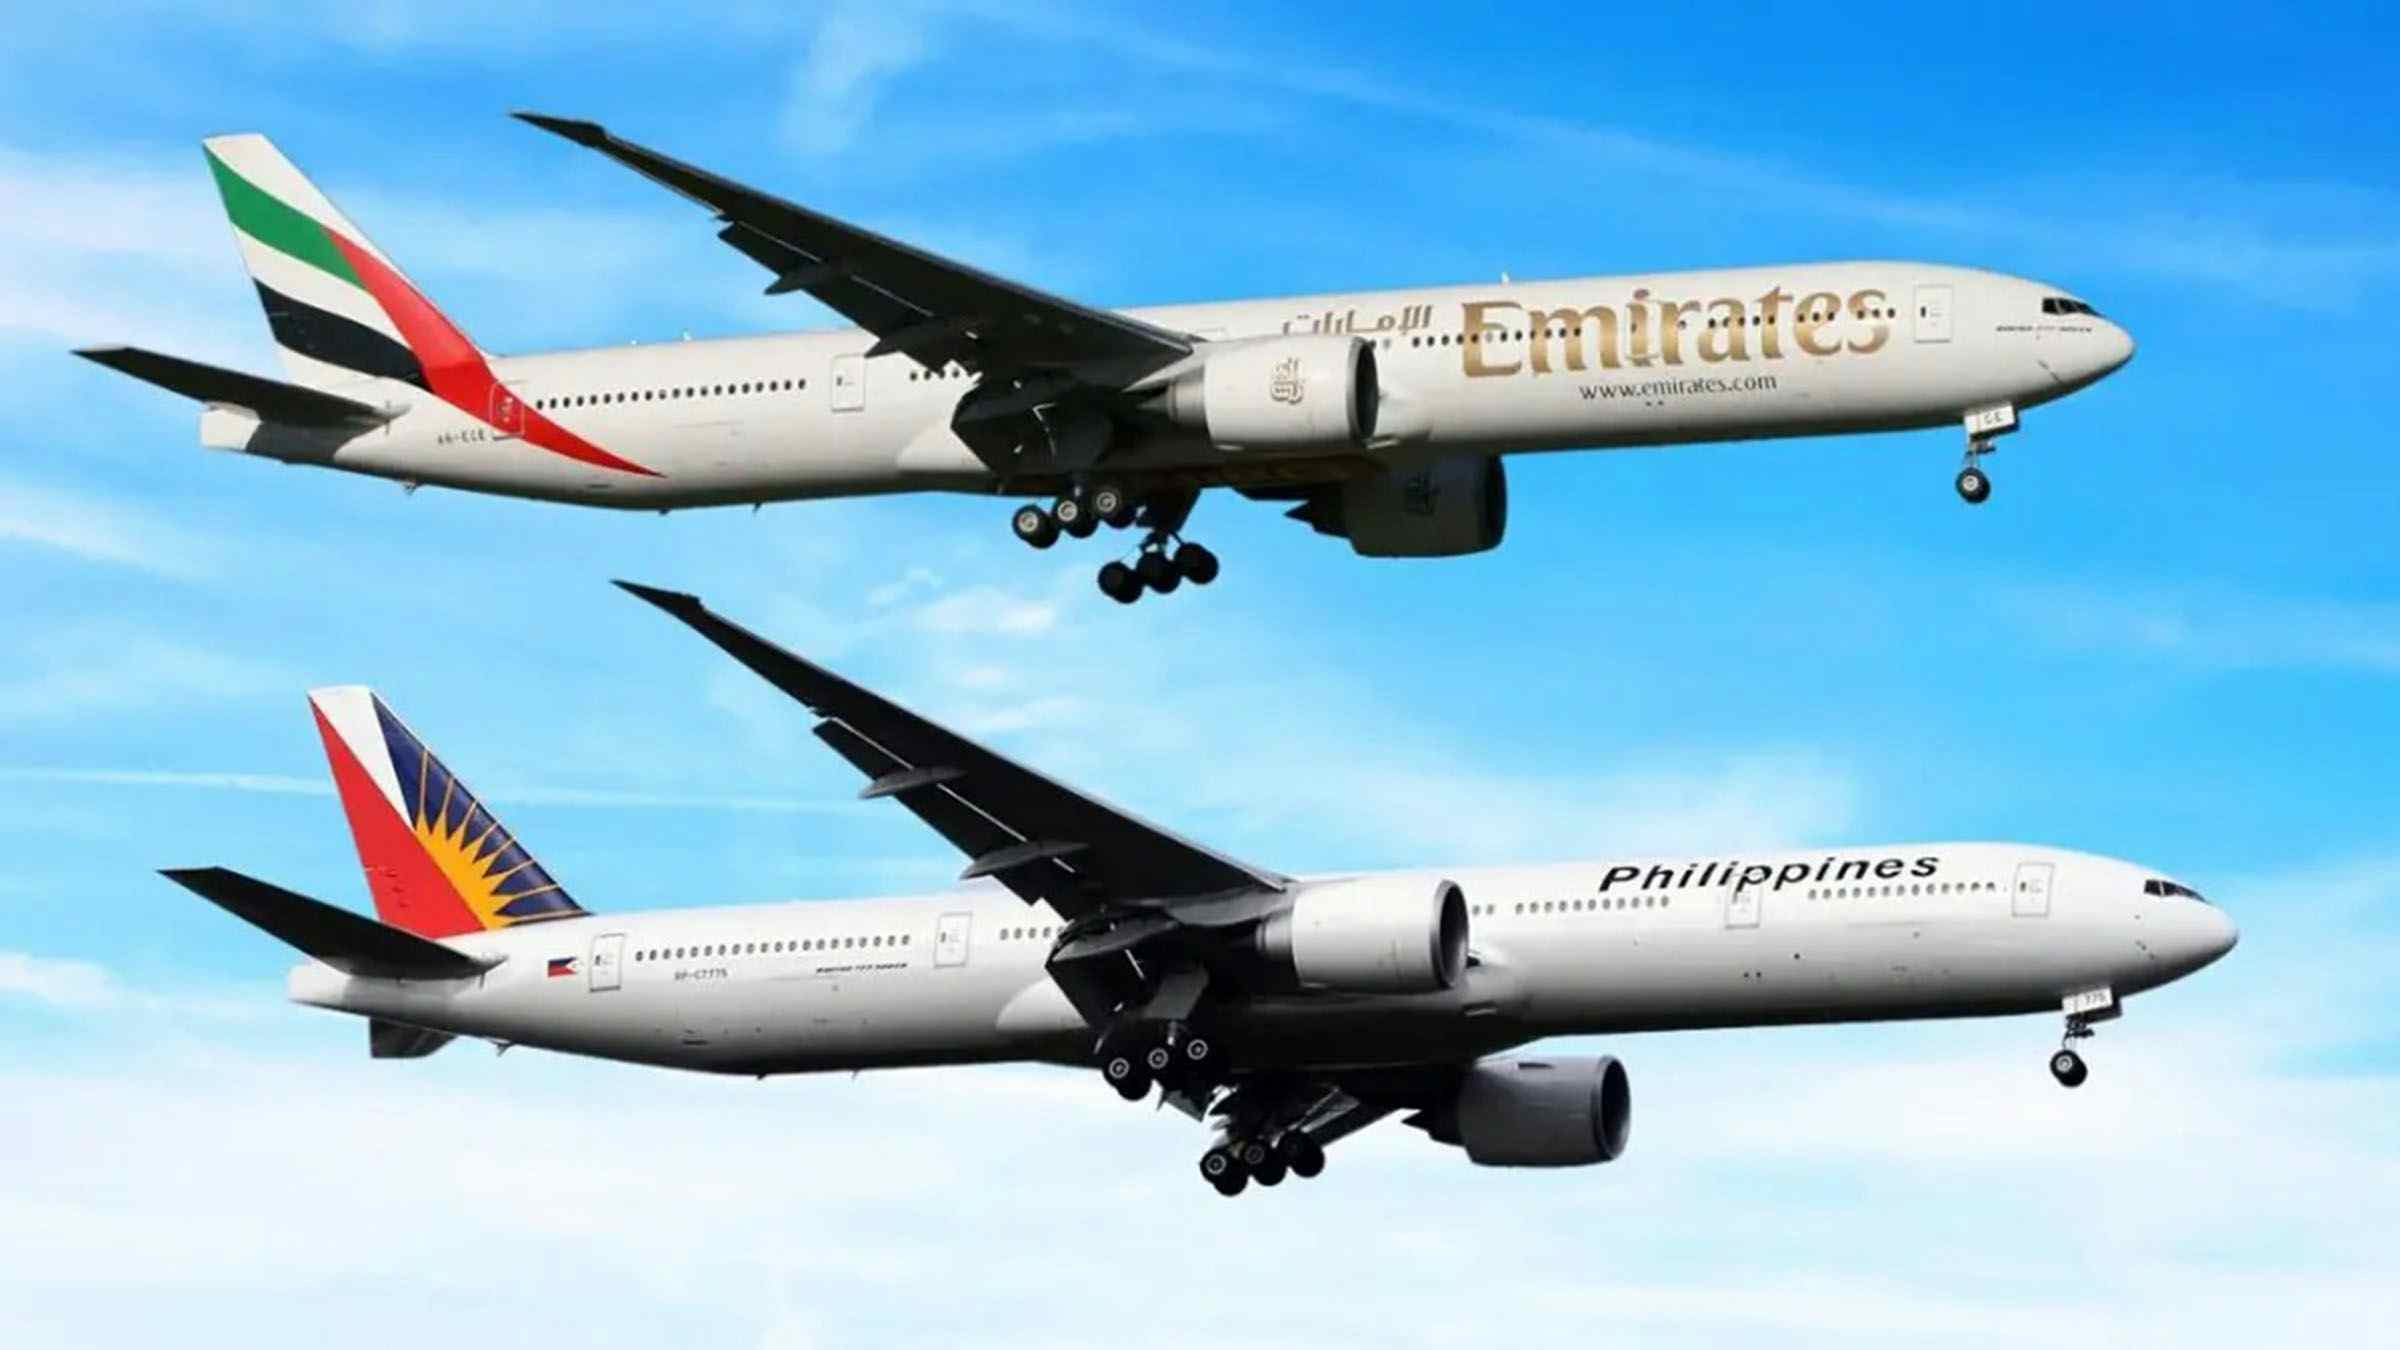 PAL partners with Emirates